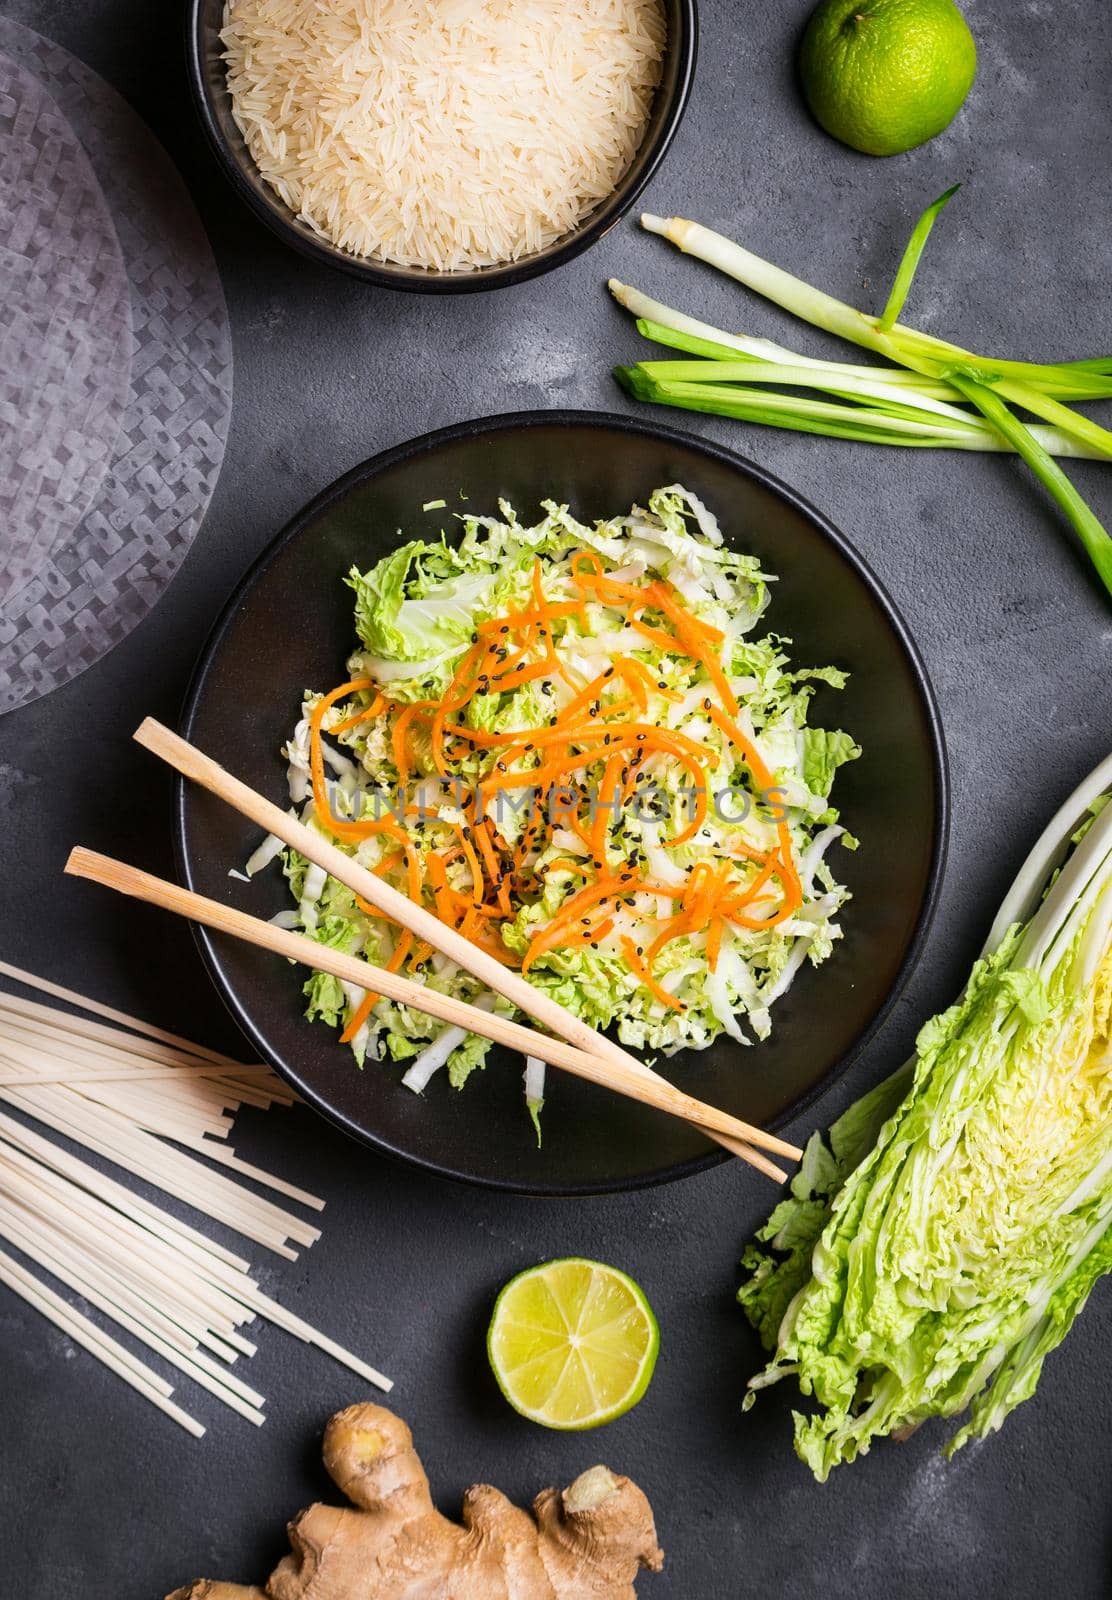 Vietnamese salad. Fresh ingredients for cooking vietnamese dinner: rice paper, rice, noodles, green onion, napa cabbage, salad. Asian cooking ingredients. Top view. Healthy vietnamese or asian dinner